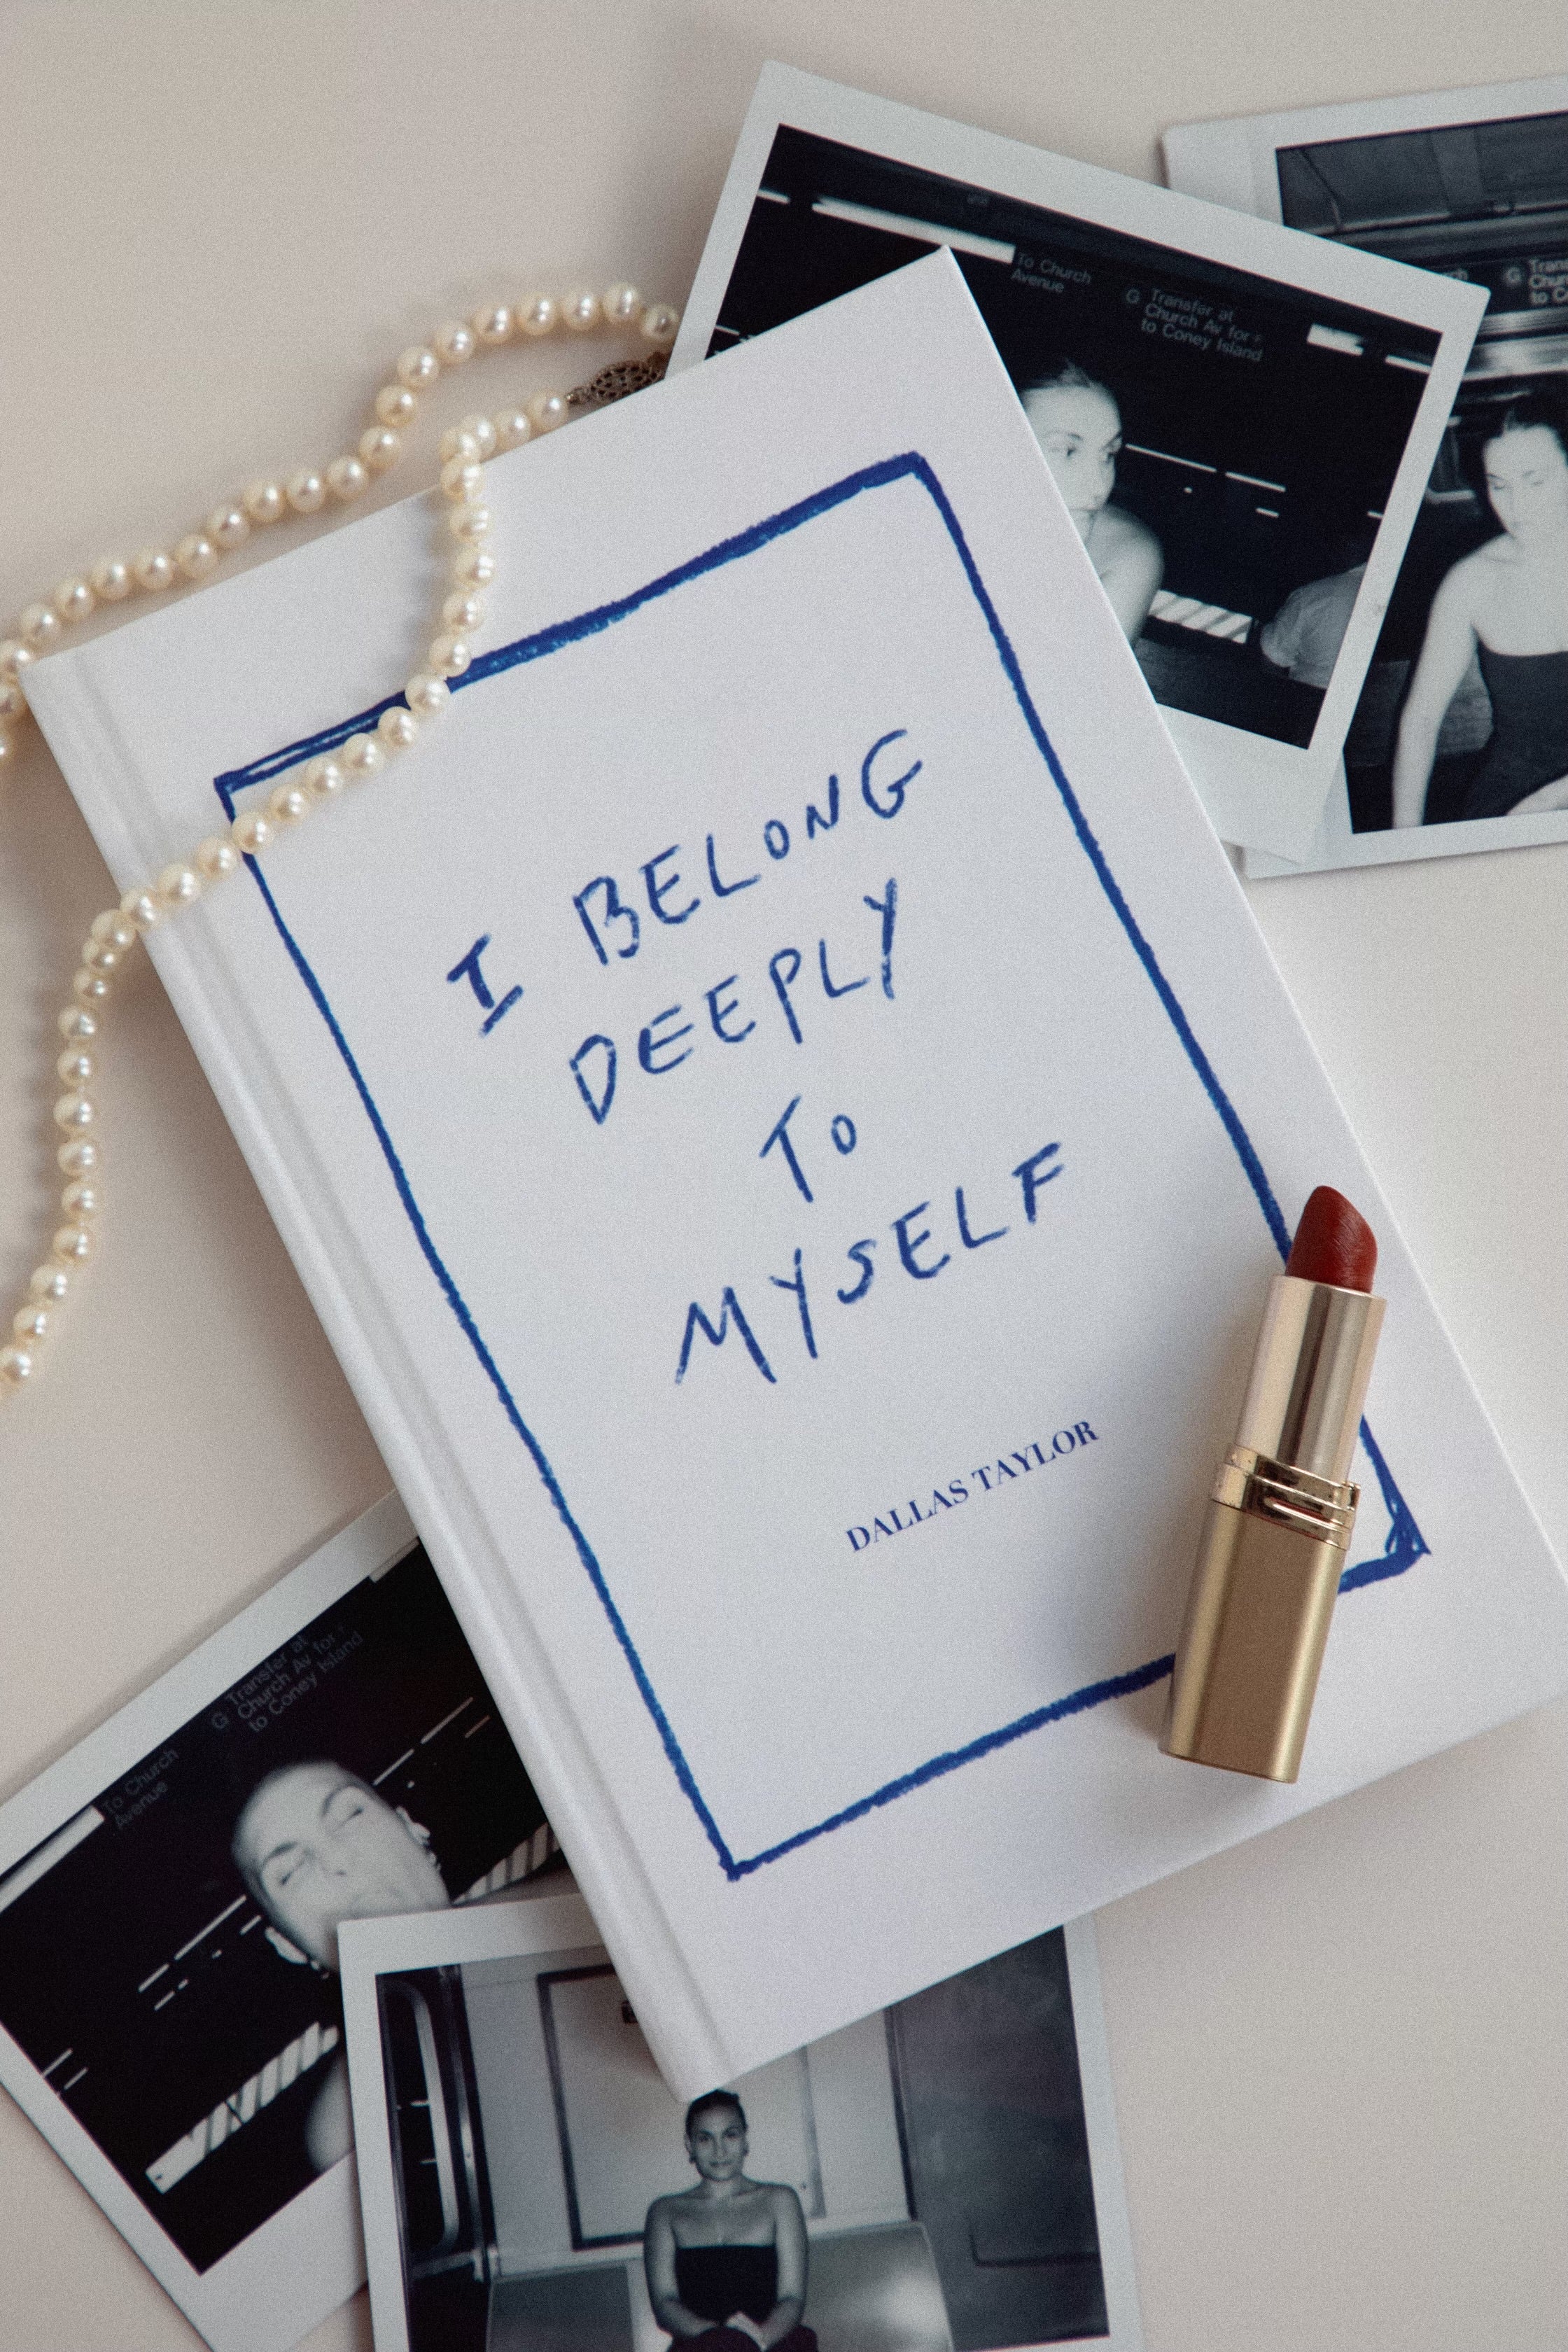 Dallas Taylor's newest book, I Belong Deeply to Myself